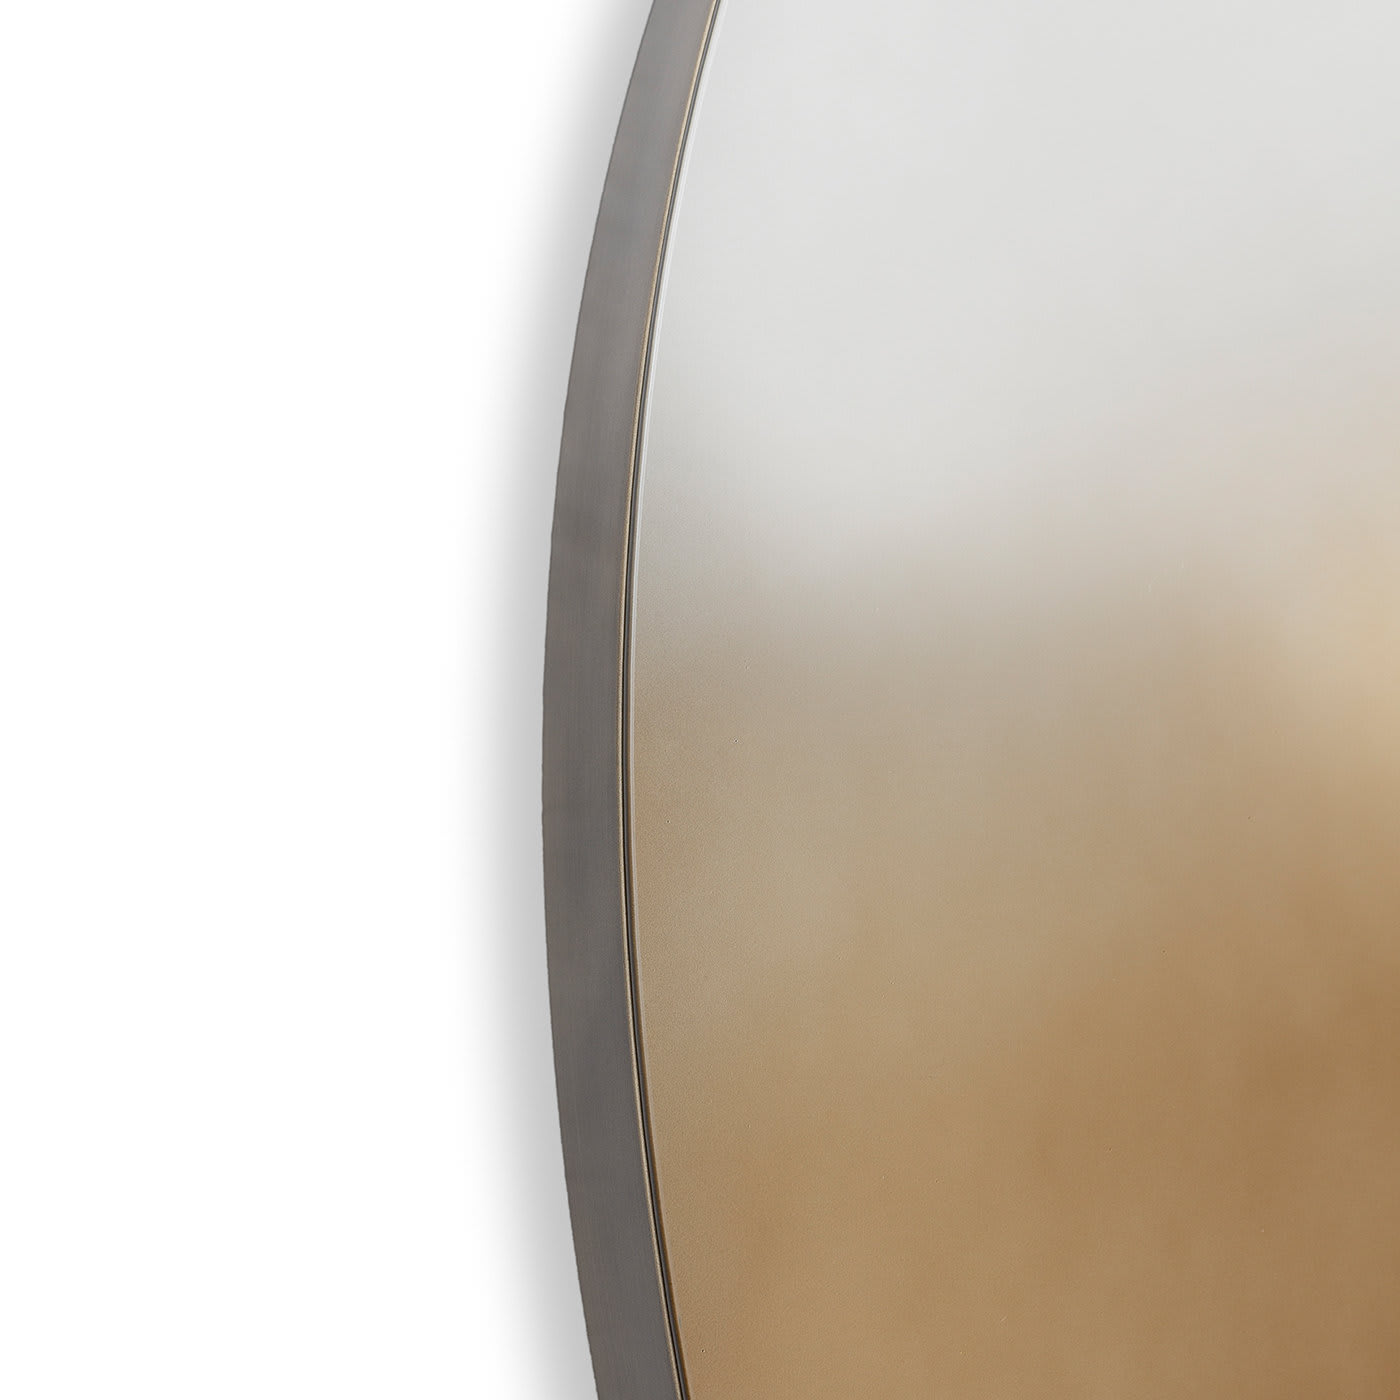 Duo Oval Mirror in Teal and Beige - Monica Madotto